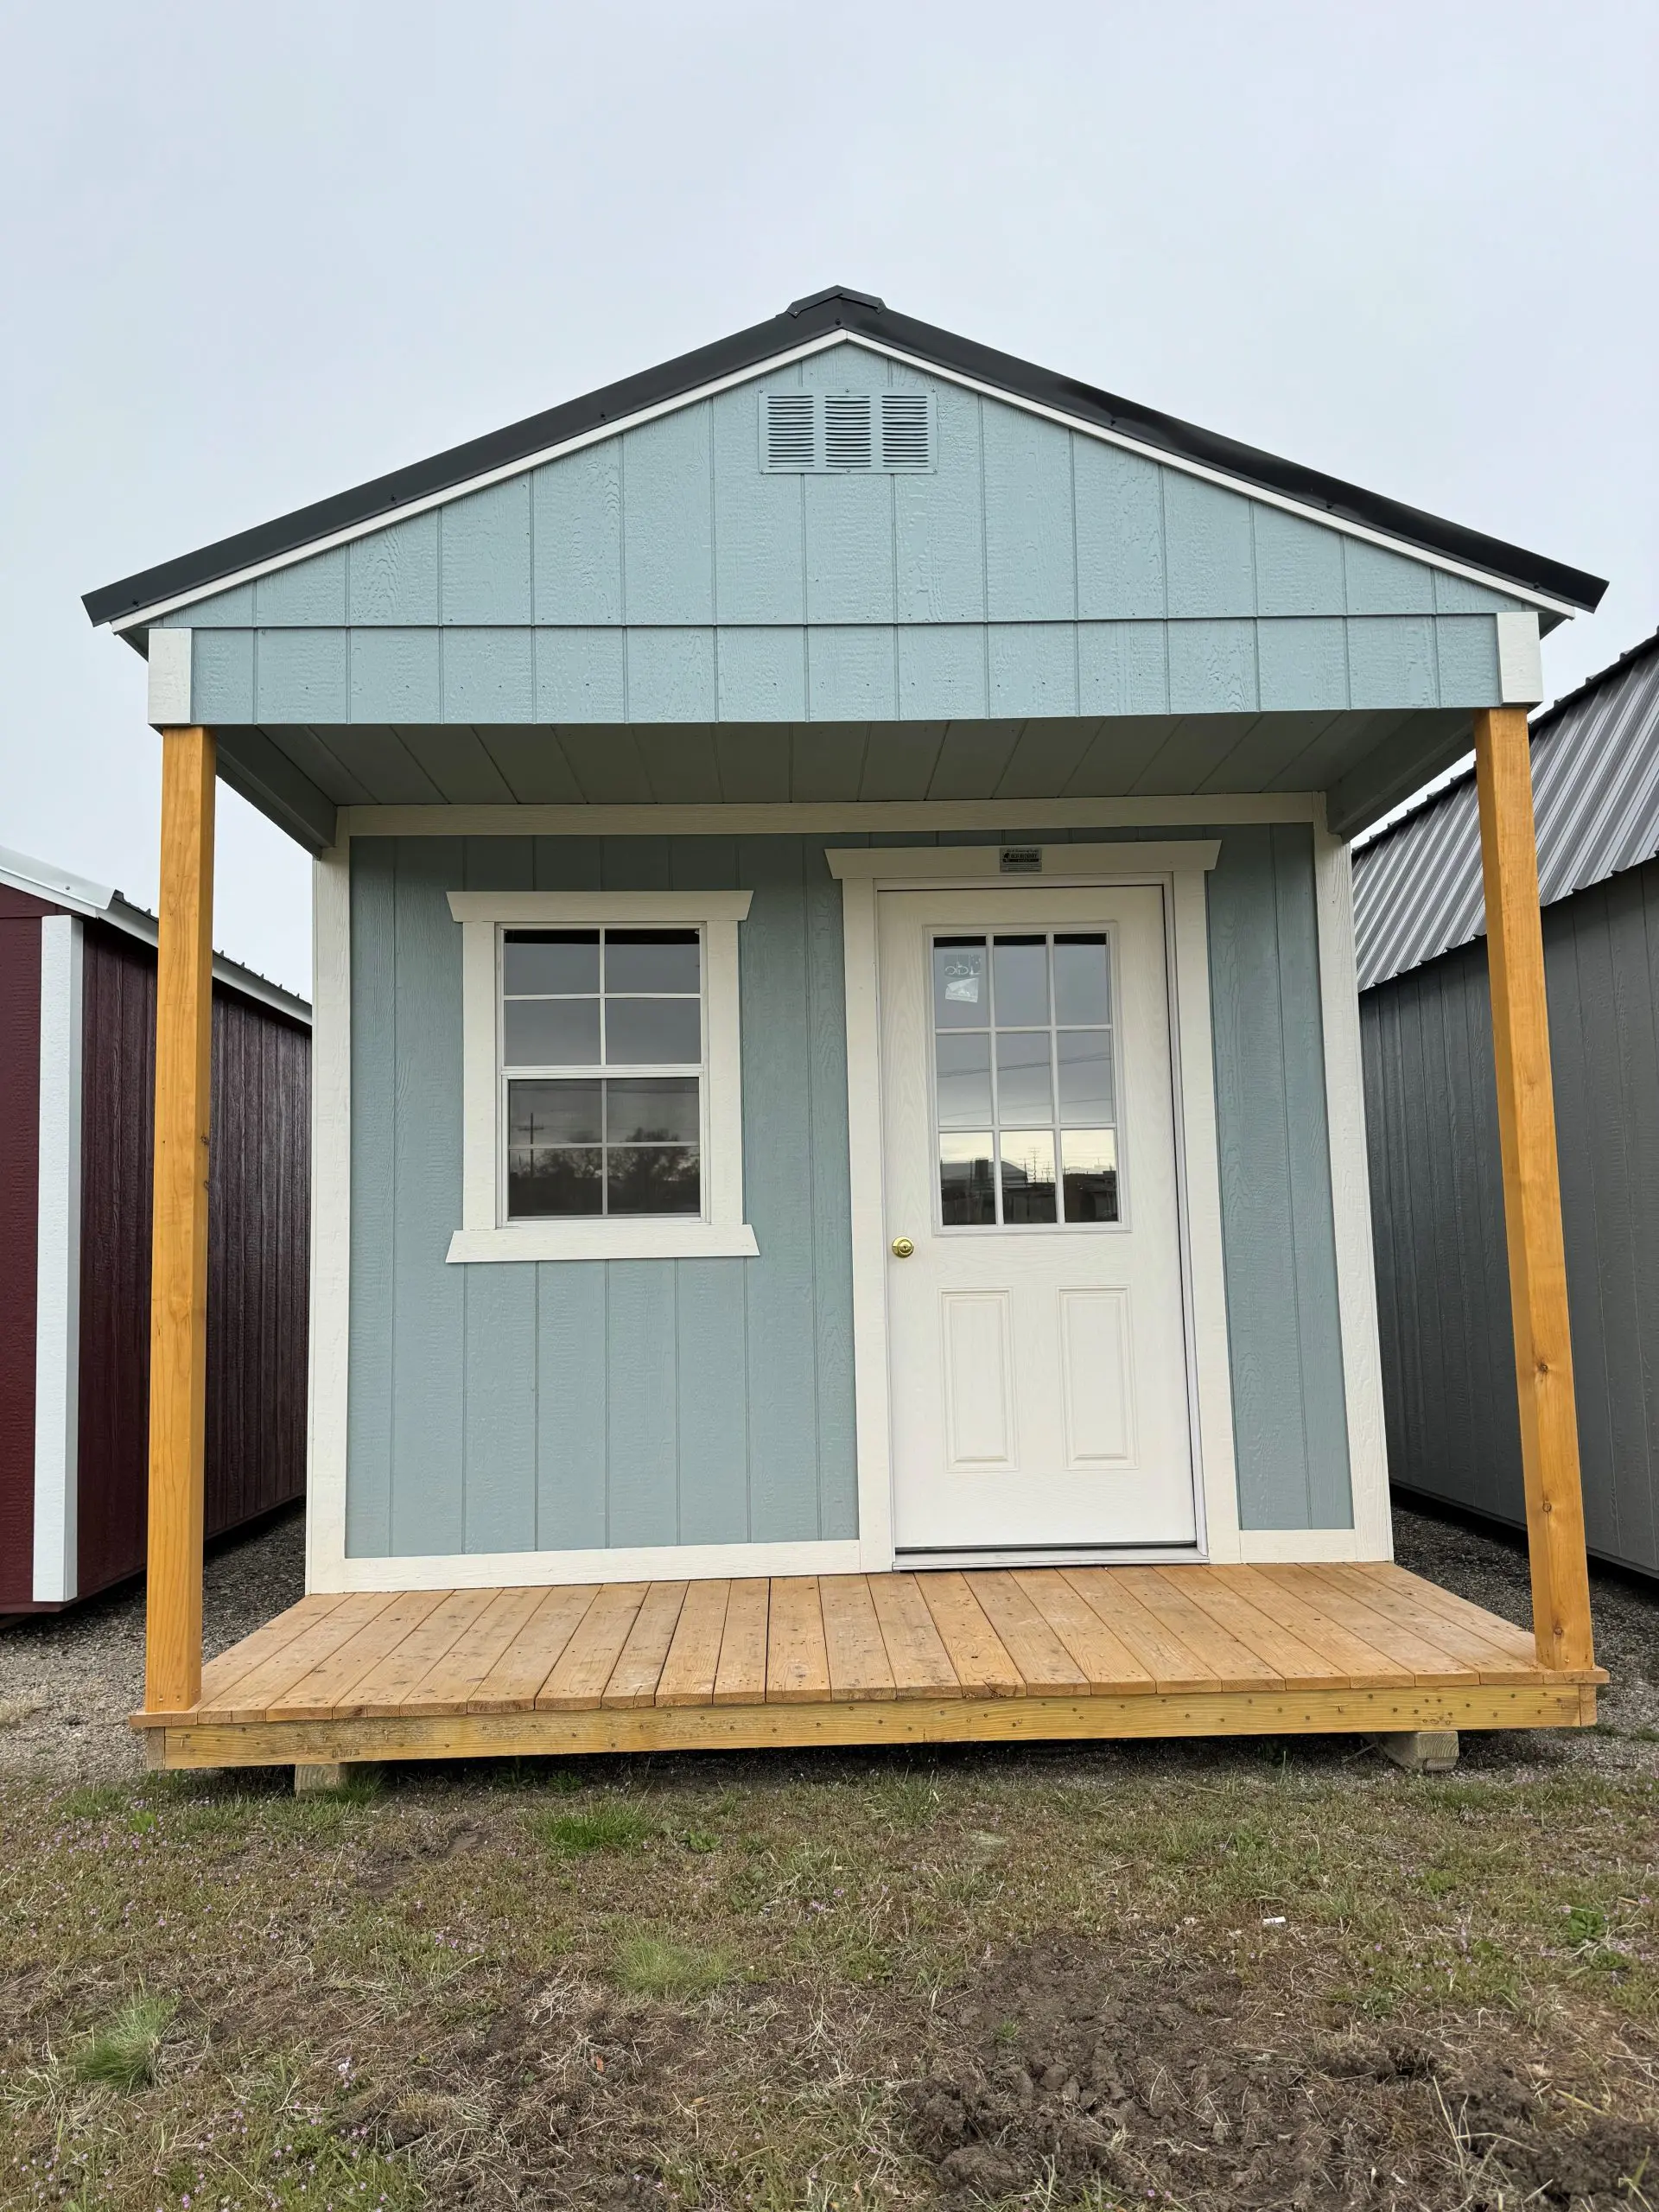 For sale 10×16 Utility Front Porch Shed Bora Bora Paint Barn White Trim at French Creek Design Shed Sales, Casper, WY